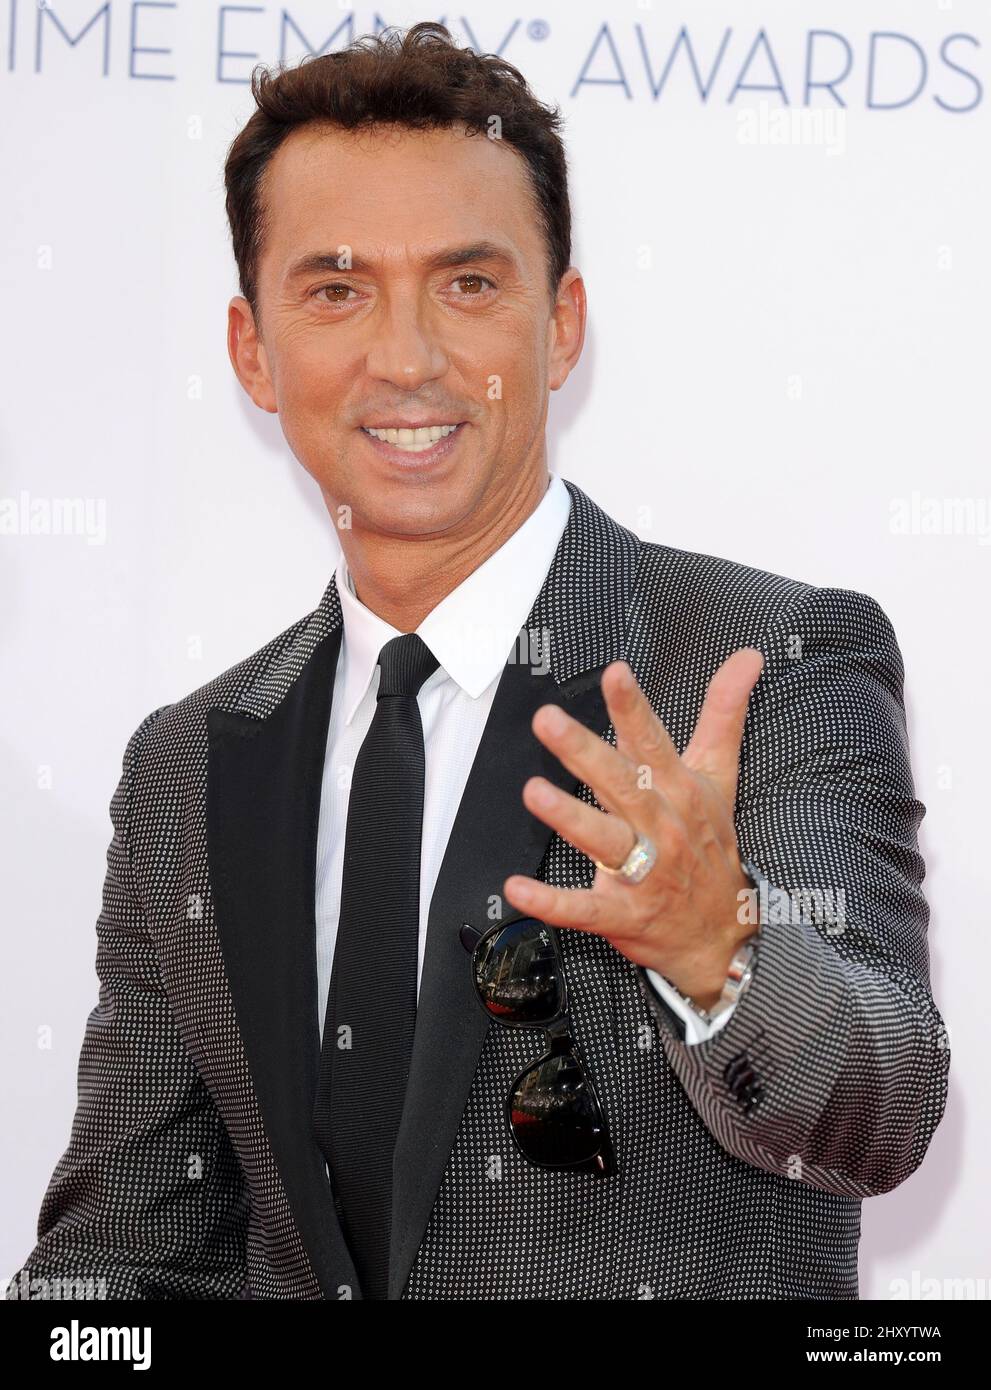 Bruno Tonioli attends the 64th Primetime Emmy Awards held at the Nokia Theatre, Los Angeles. Stock Photo